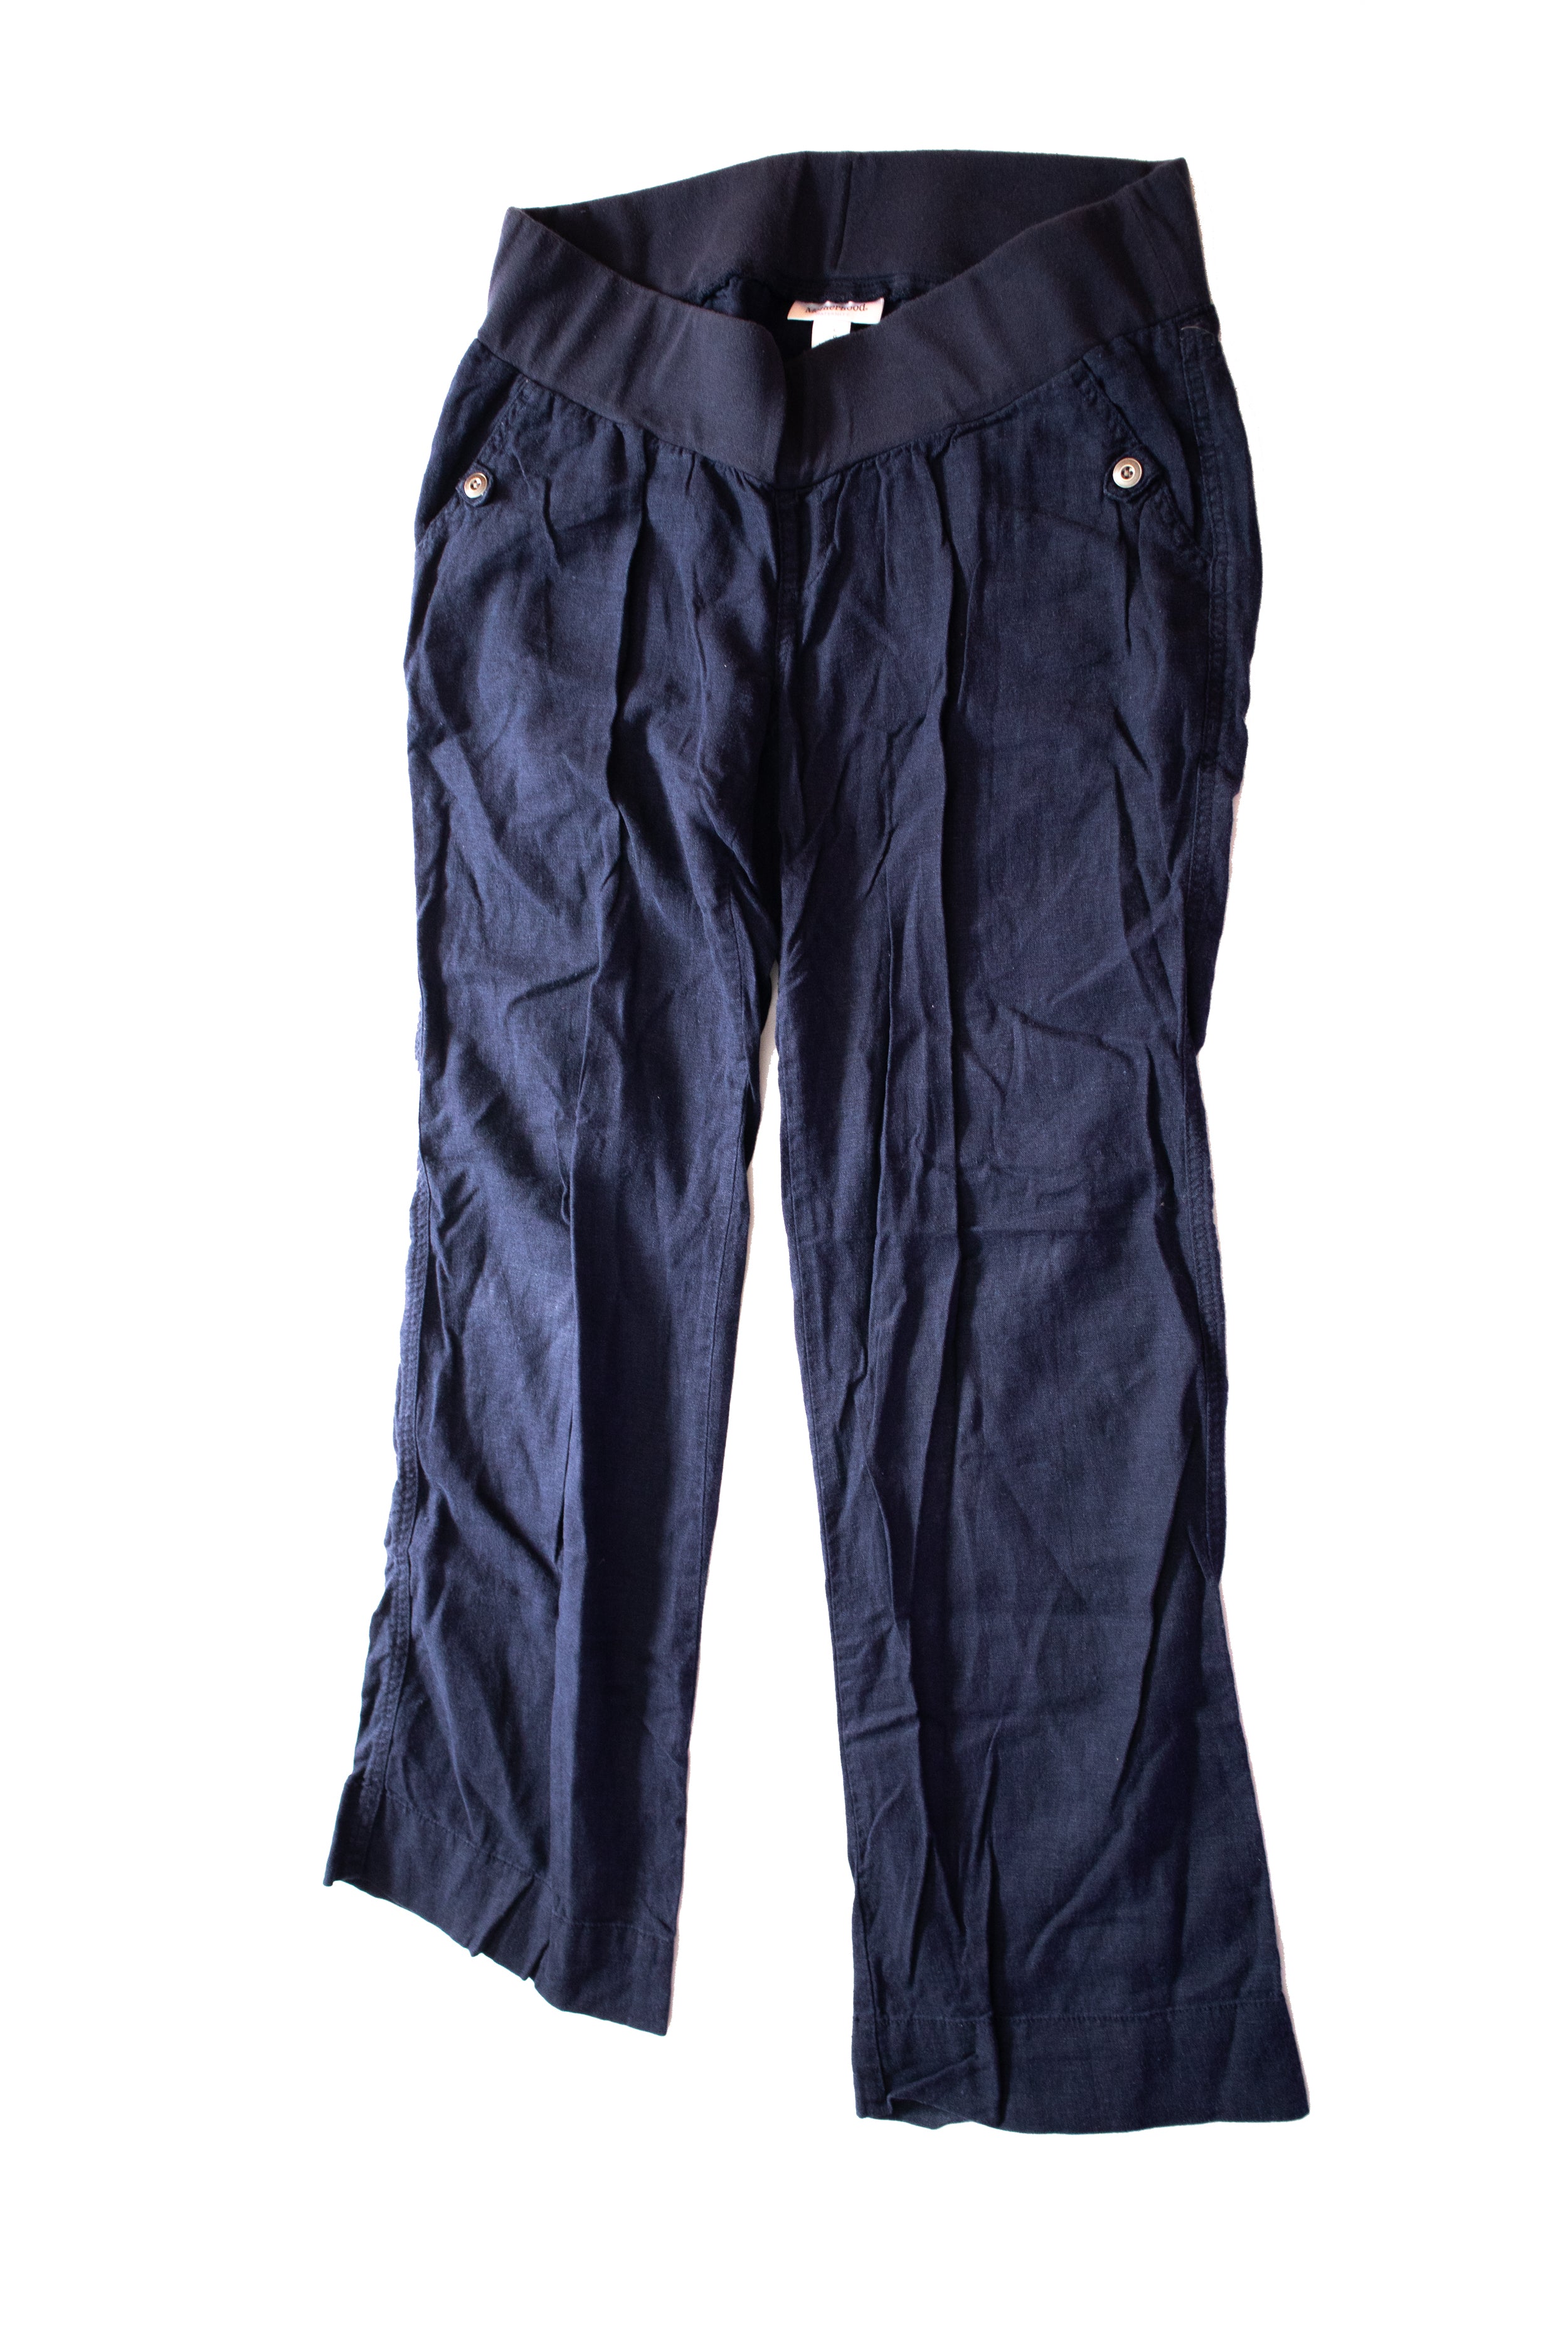 Motherhood Solid Navy Blue Casual Pants Size S (Maternity) - 45